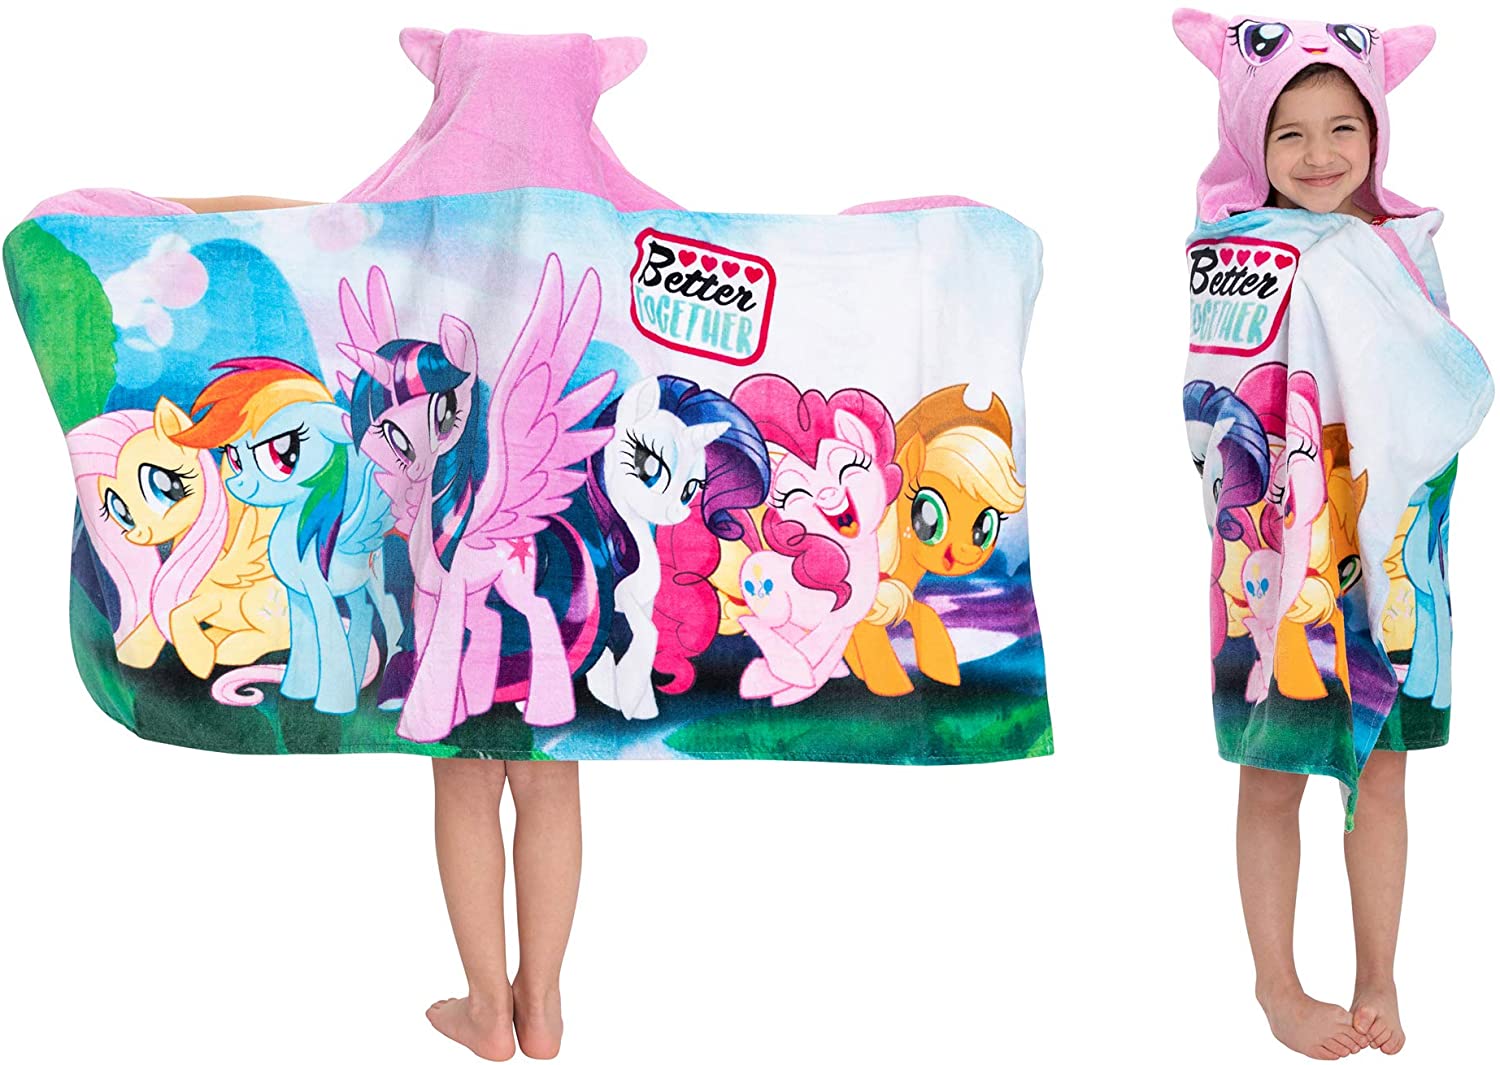 MLP Mane 6 Better Together Bath and Beach Hooded Towel Wrap 1